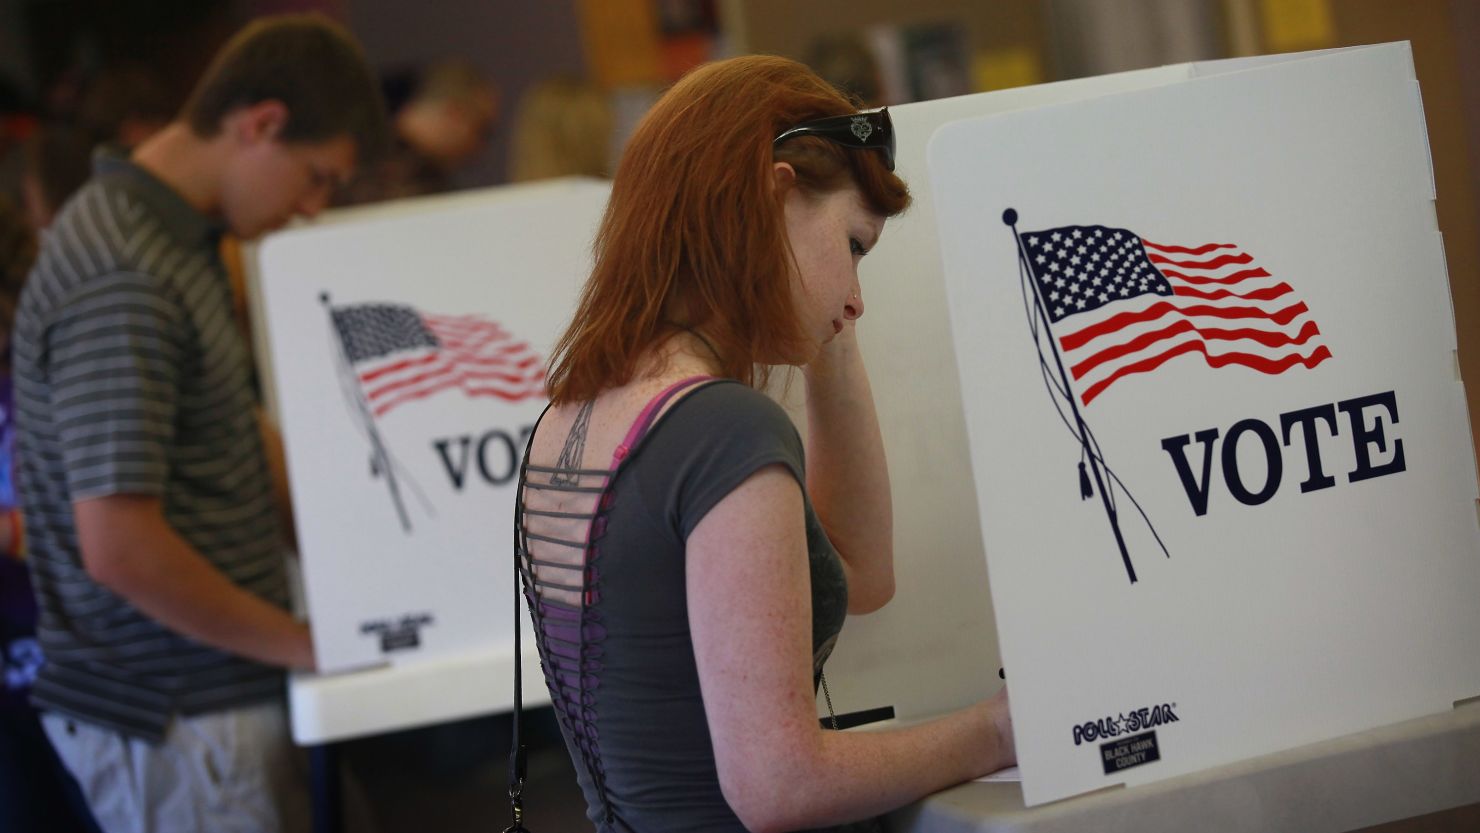 Students vote at the University of Northern Iowa in Cedar Falls in 2012.